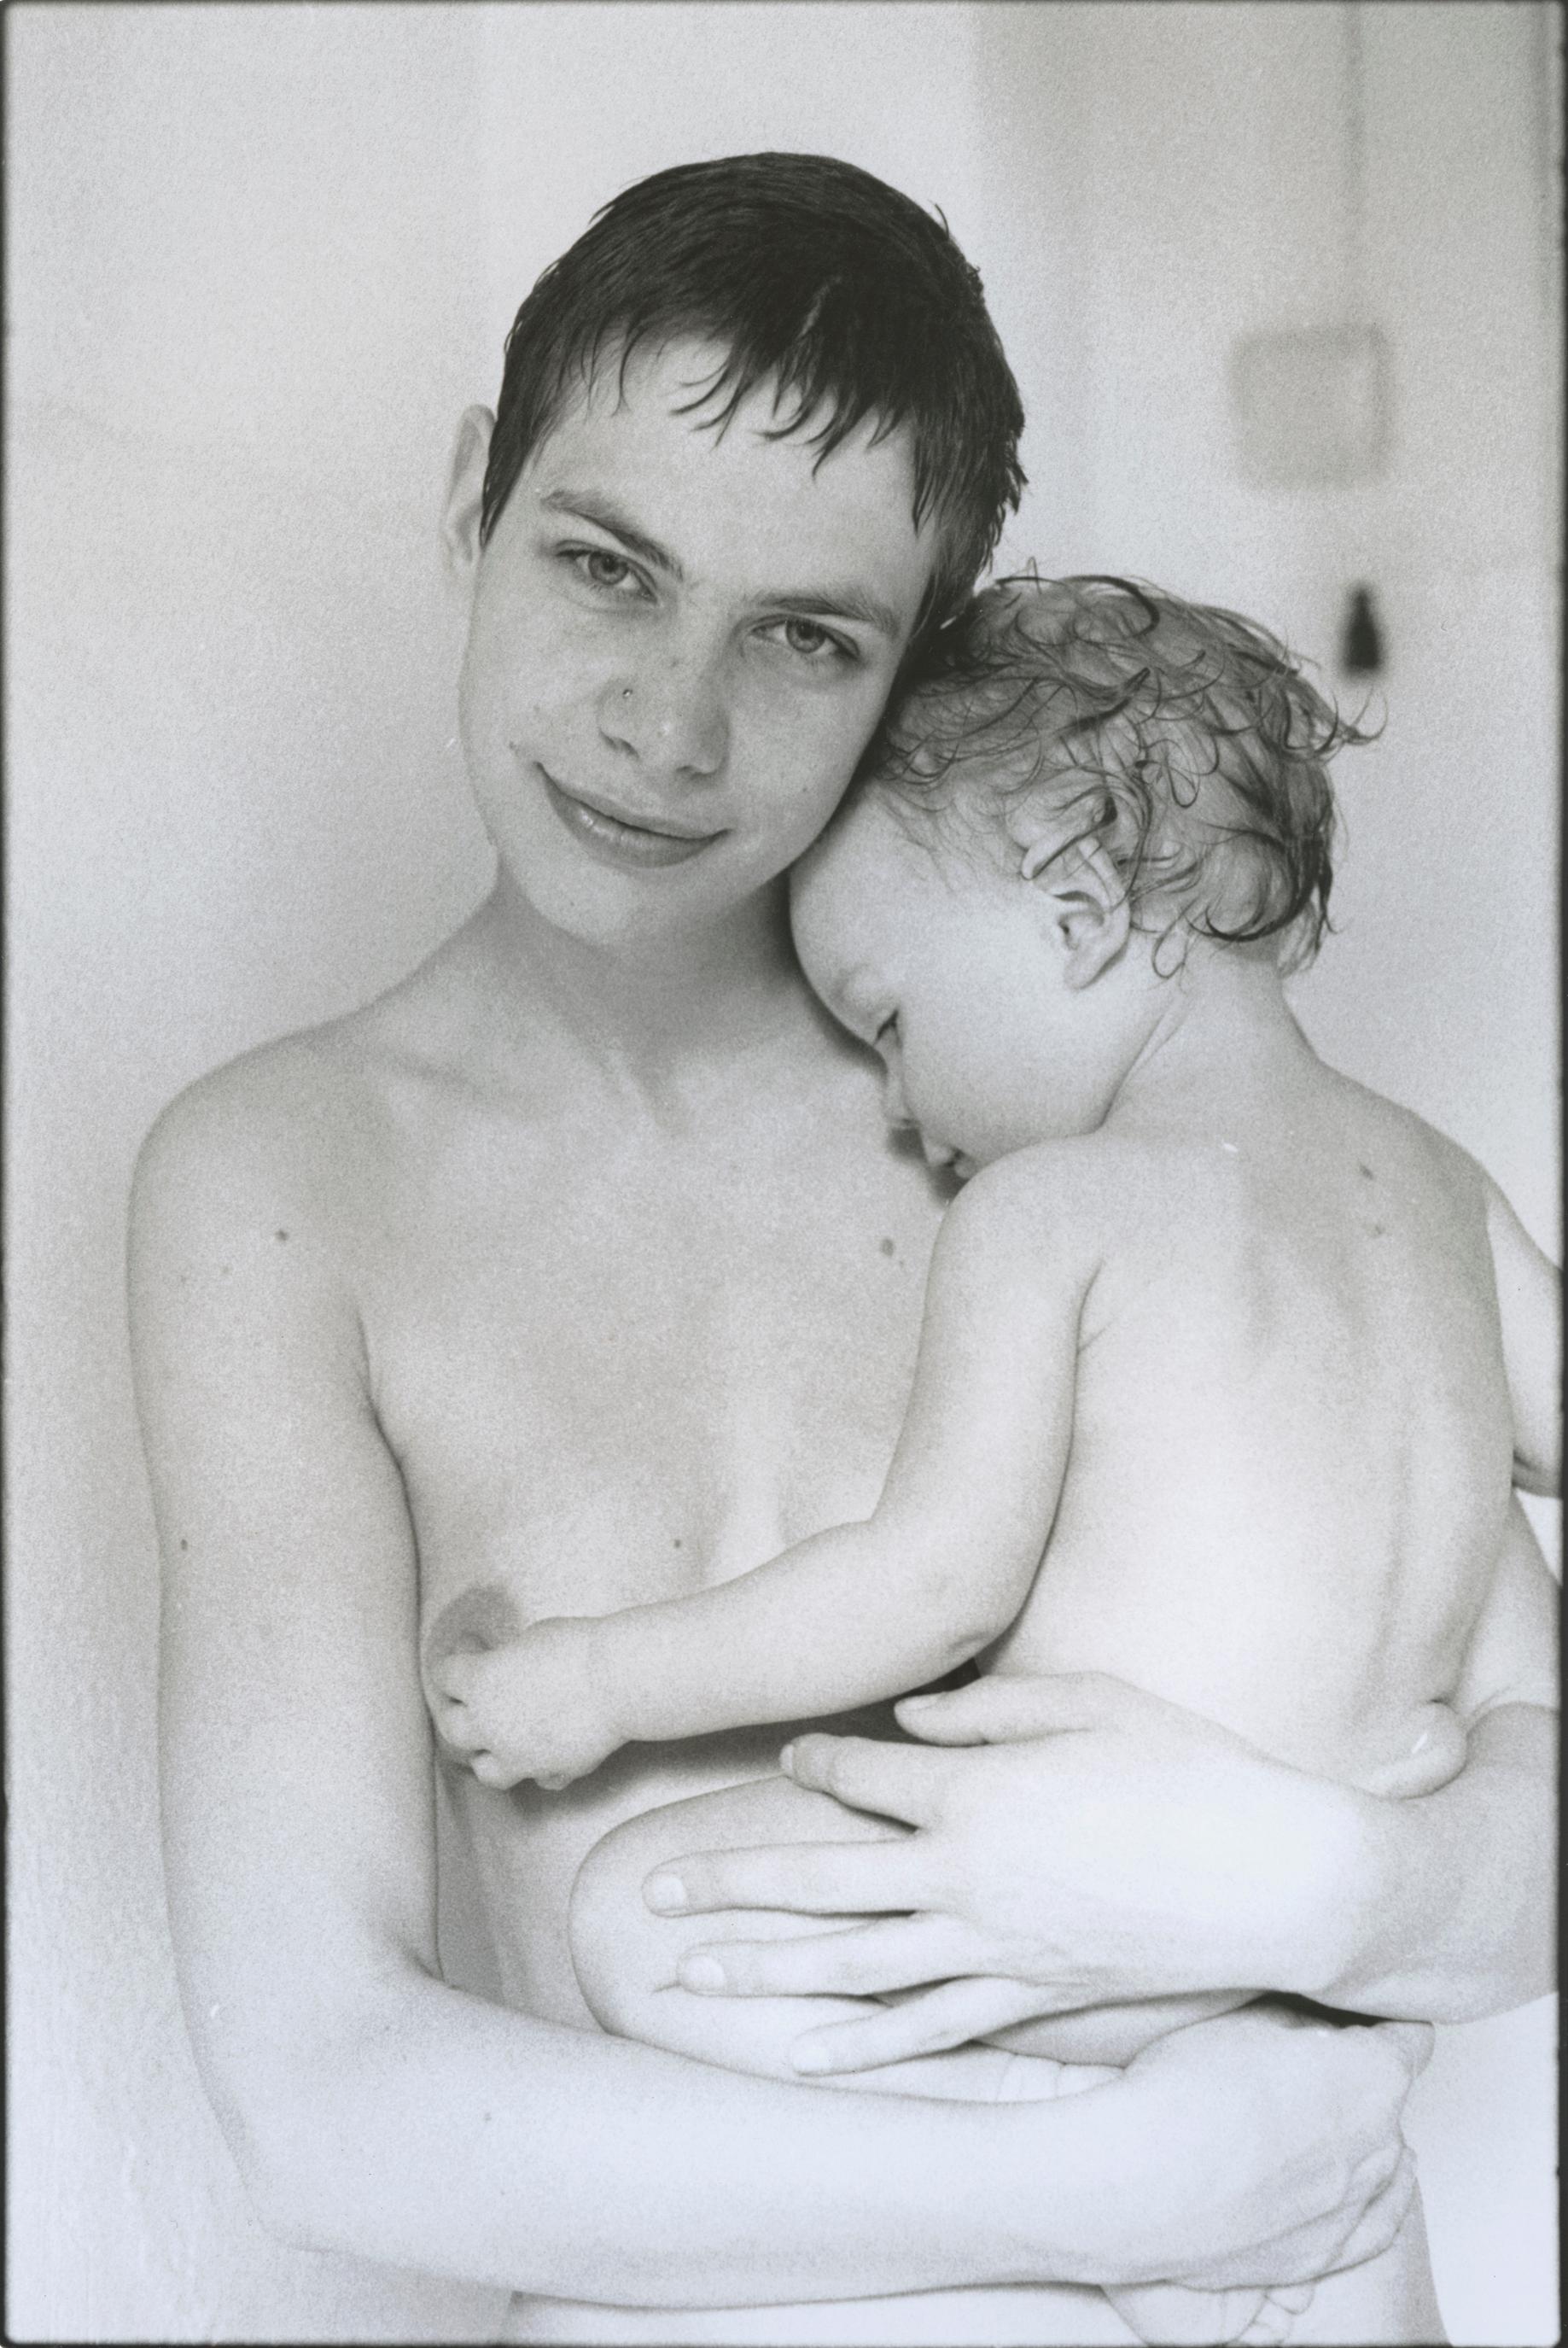 Birgit and Paul, 1996 

Edition 1/10, 
25.5x20cm including the white frame, image size 23x15cm. 
Analog C-Print, hand-printed by the Artist. 
Certificate and Signature label. 
Not mounted. 

Stefanie Schneider's early woman portraits and nudes.